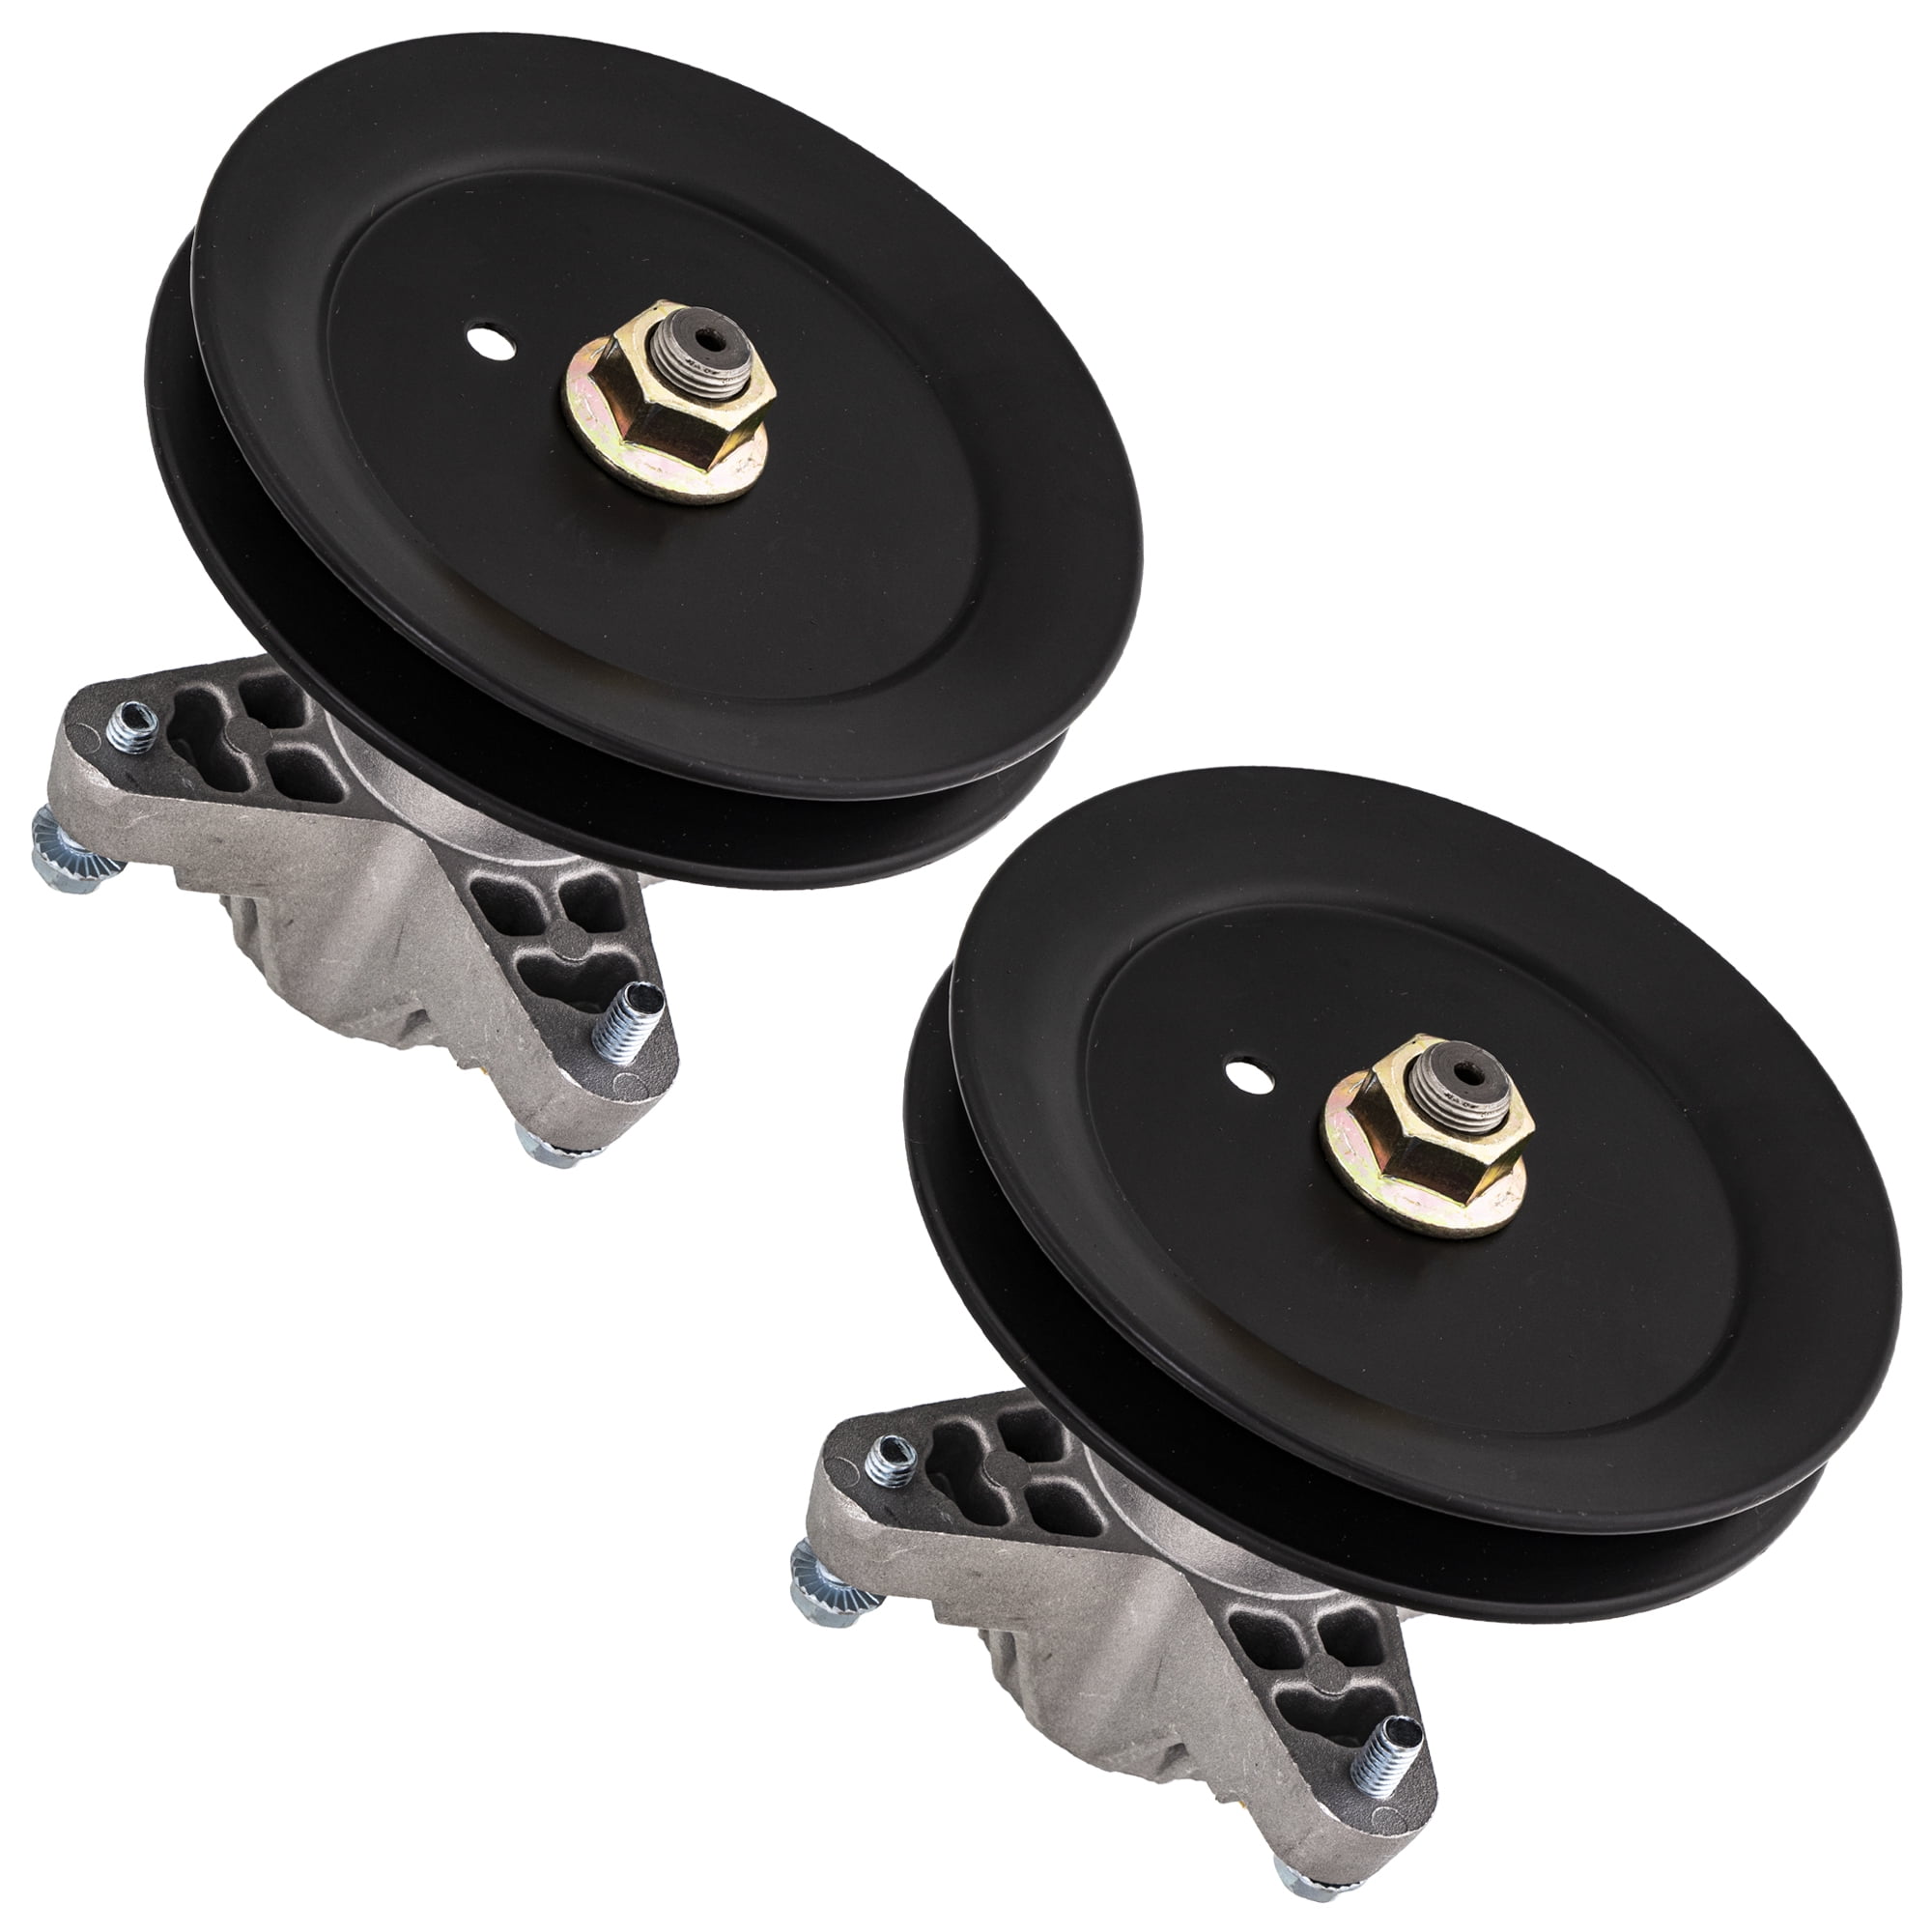 8ten Spindle For Mtd Cub Cadet Rzt 42 Lt1042 918 0624b 42 Inch 2 Pack